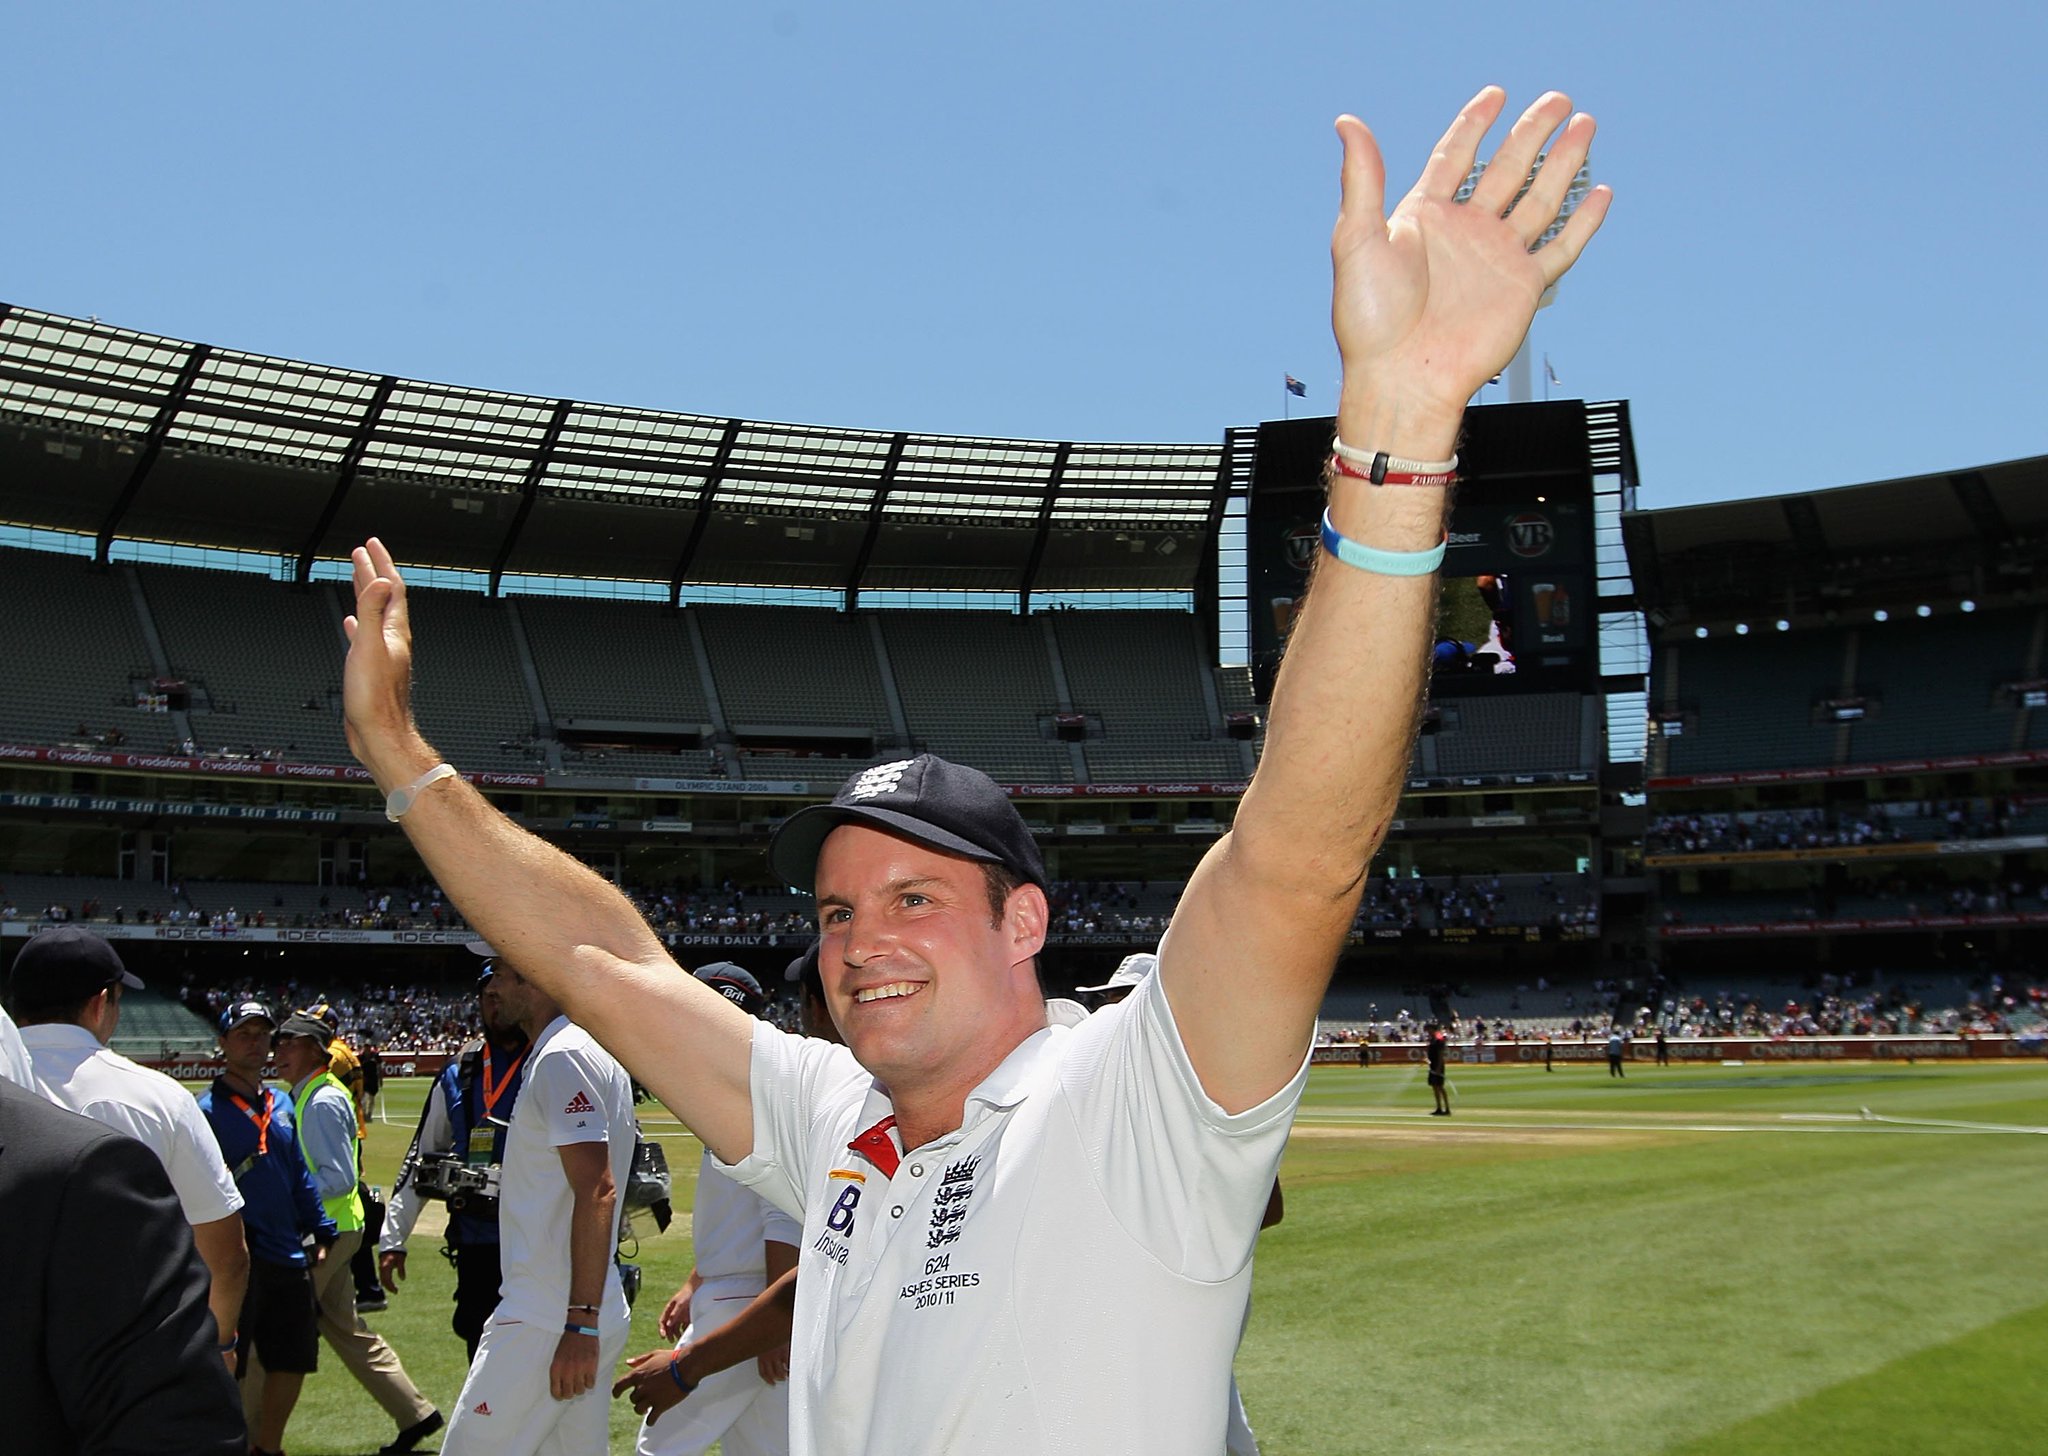 Happy birthday to England\s MD Andrew Strauss. 